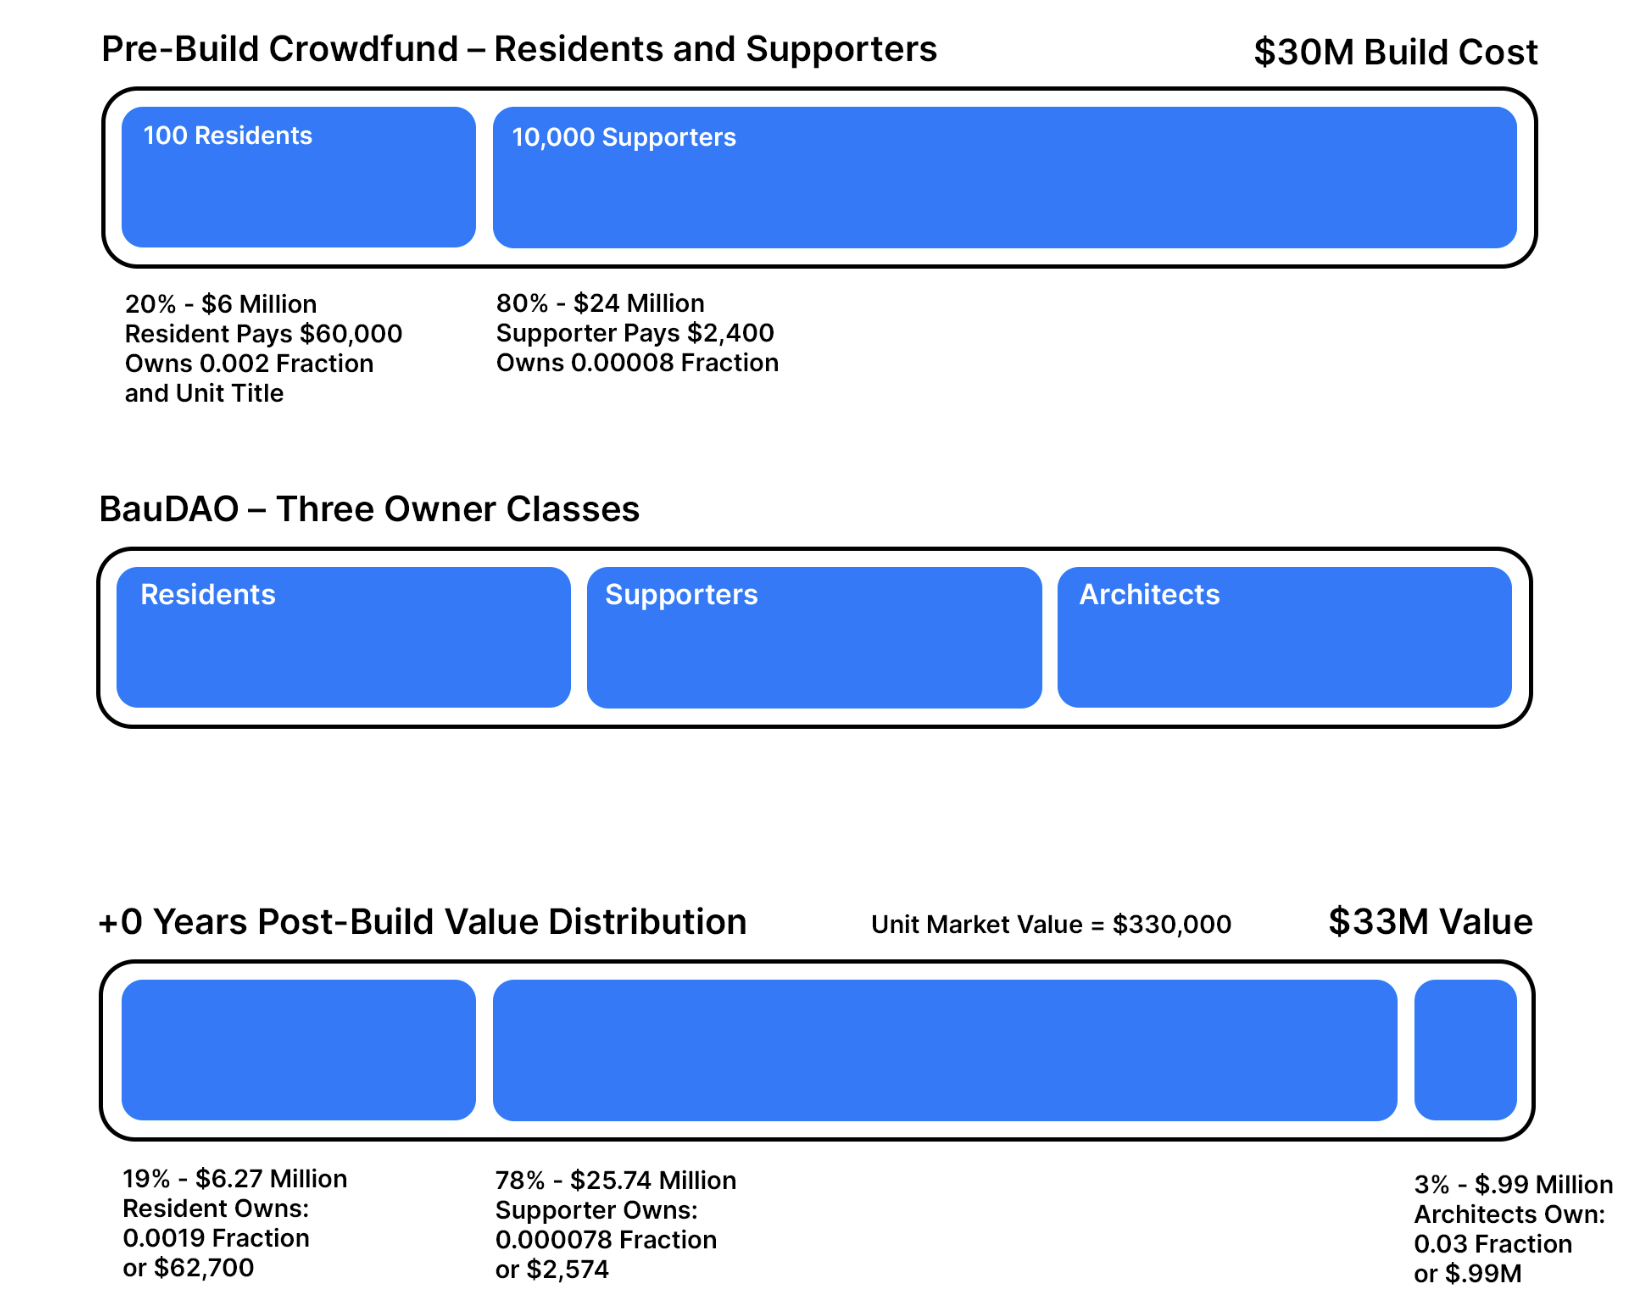 Figure 3. Owner Types and Crowdfund Distribution. Note the 10% Cost to Value Margin, the difference between the cost to build, and the market value immediately following completion. This margin is distributed more or less evenly across the three owner types, thus Architects receiving 3% Ownership.